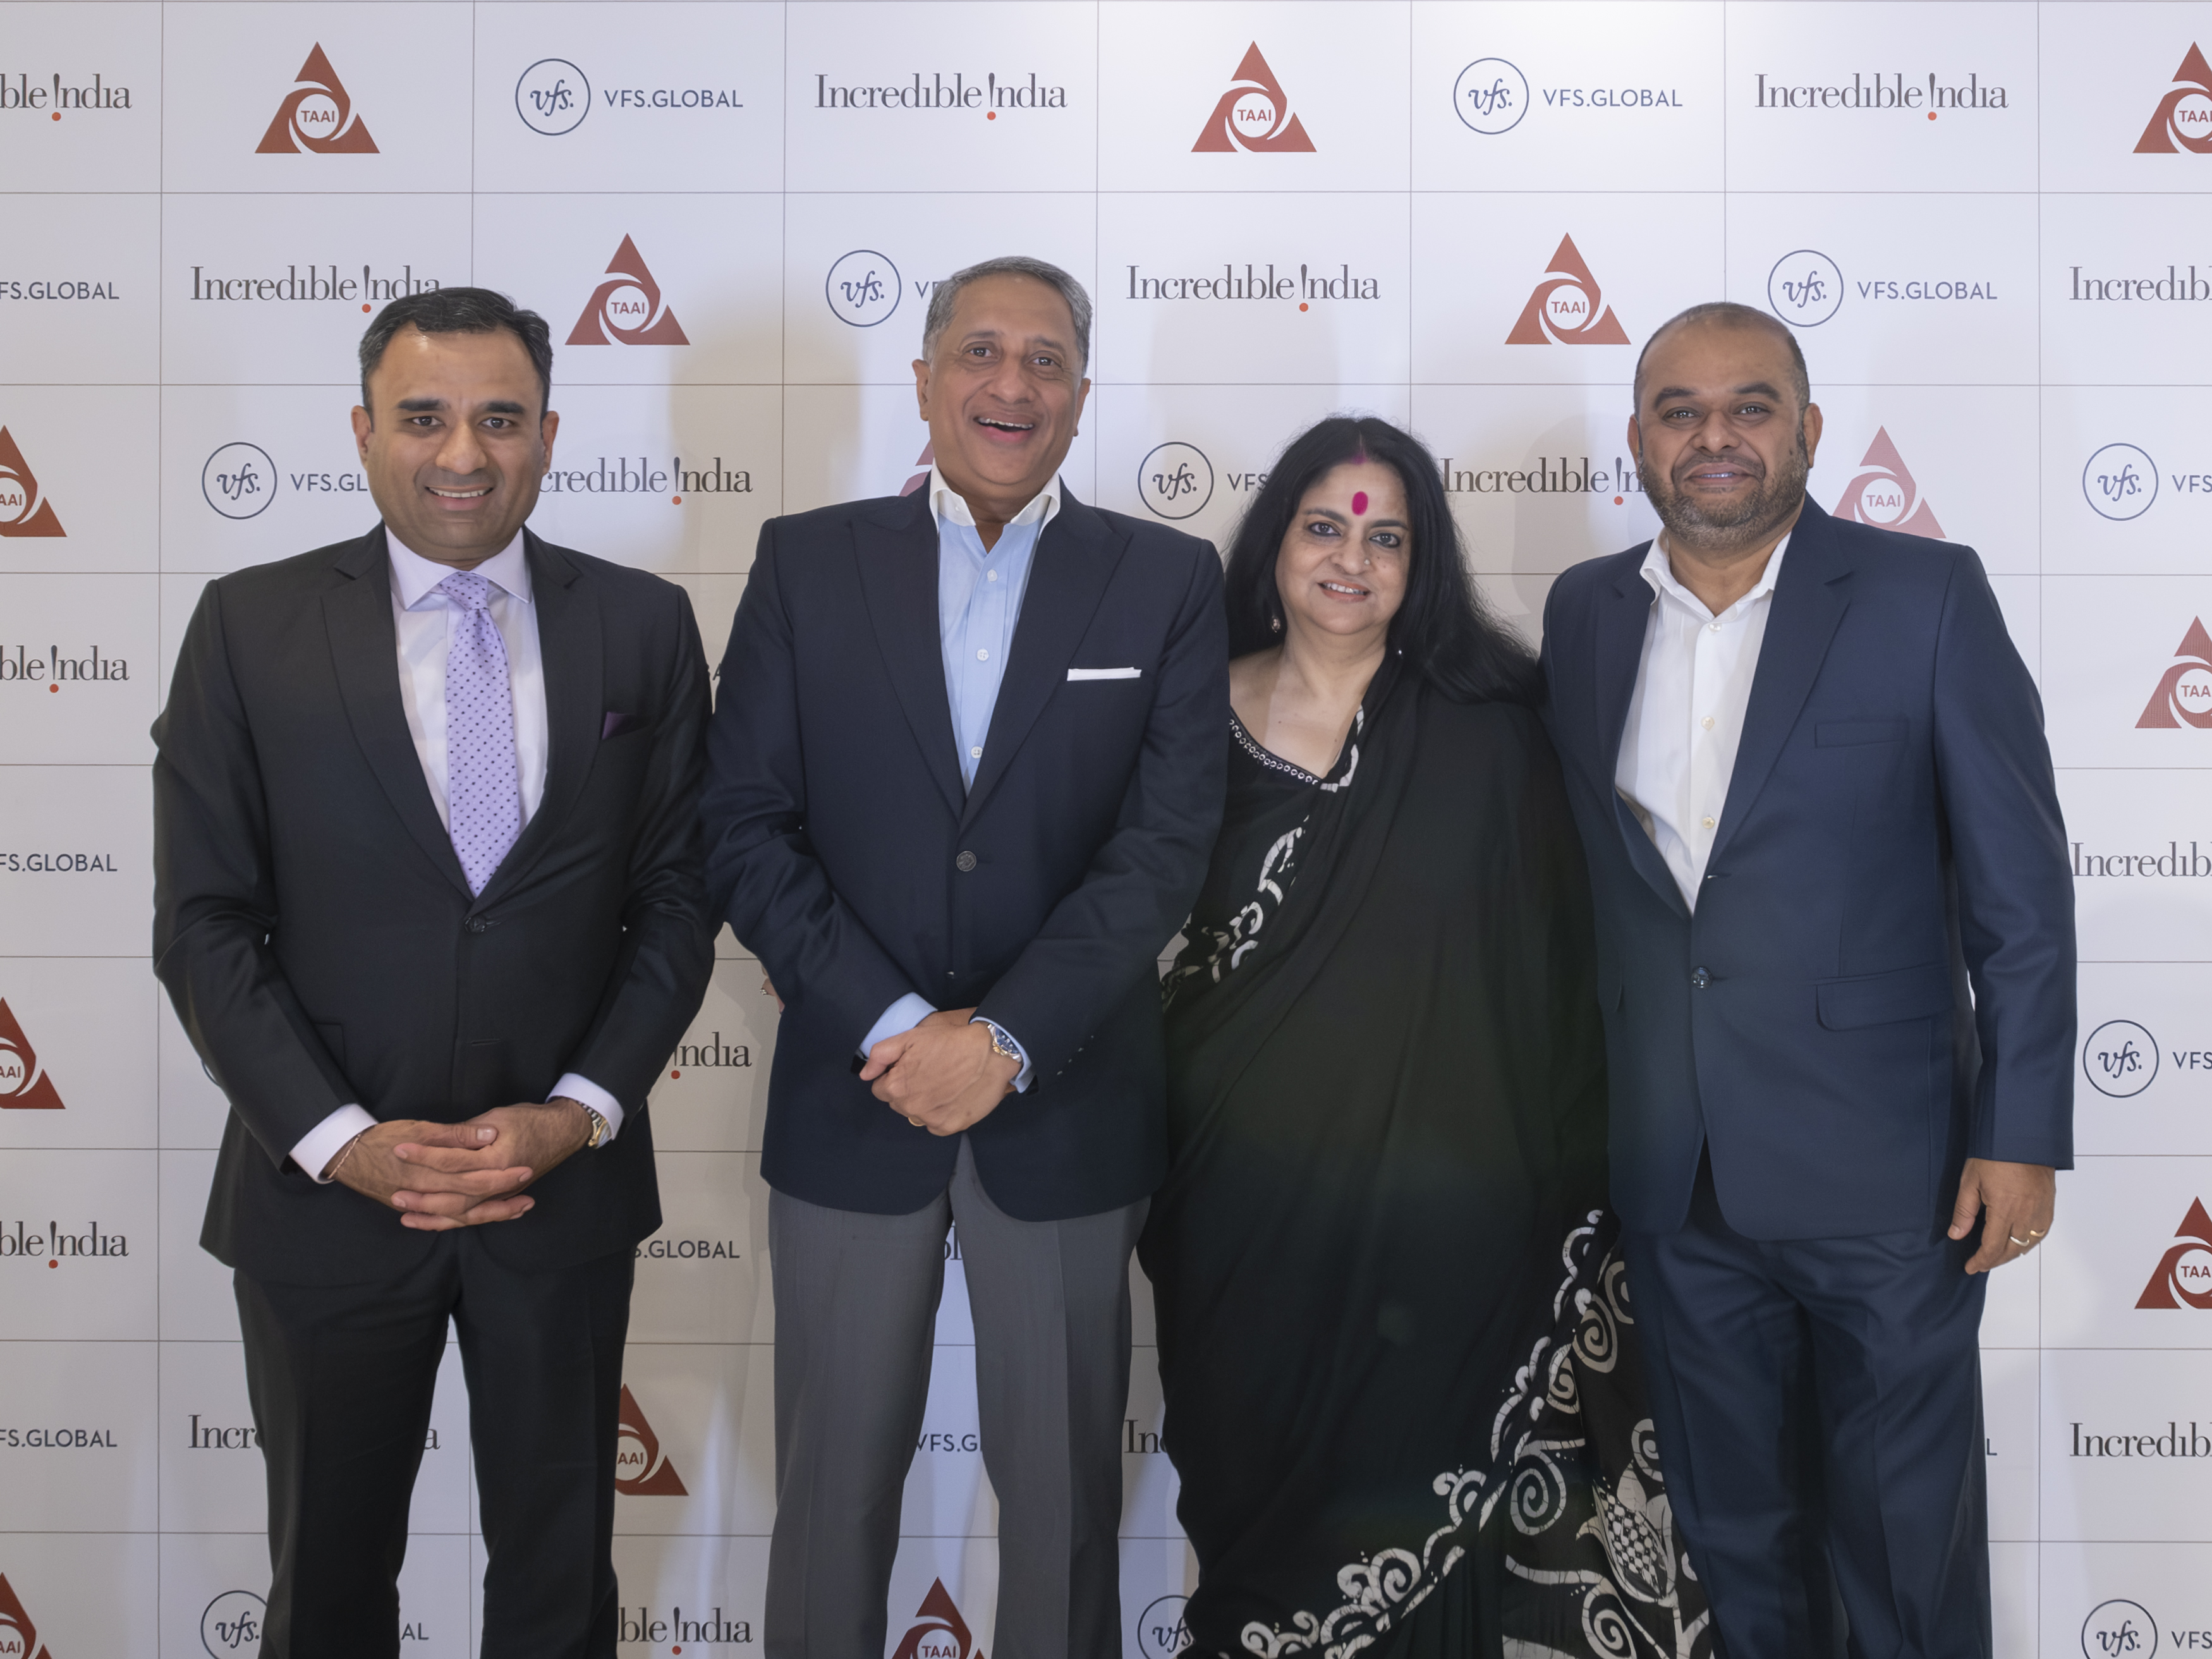 B2B Incredible India Business Networking Event in Dubai Establishes Strong Business Ties with GCC Buyers to Foster Tourism Visitorship to India